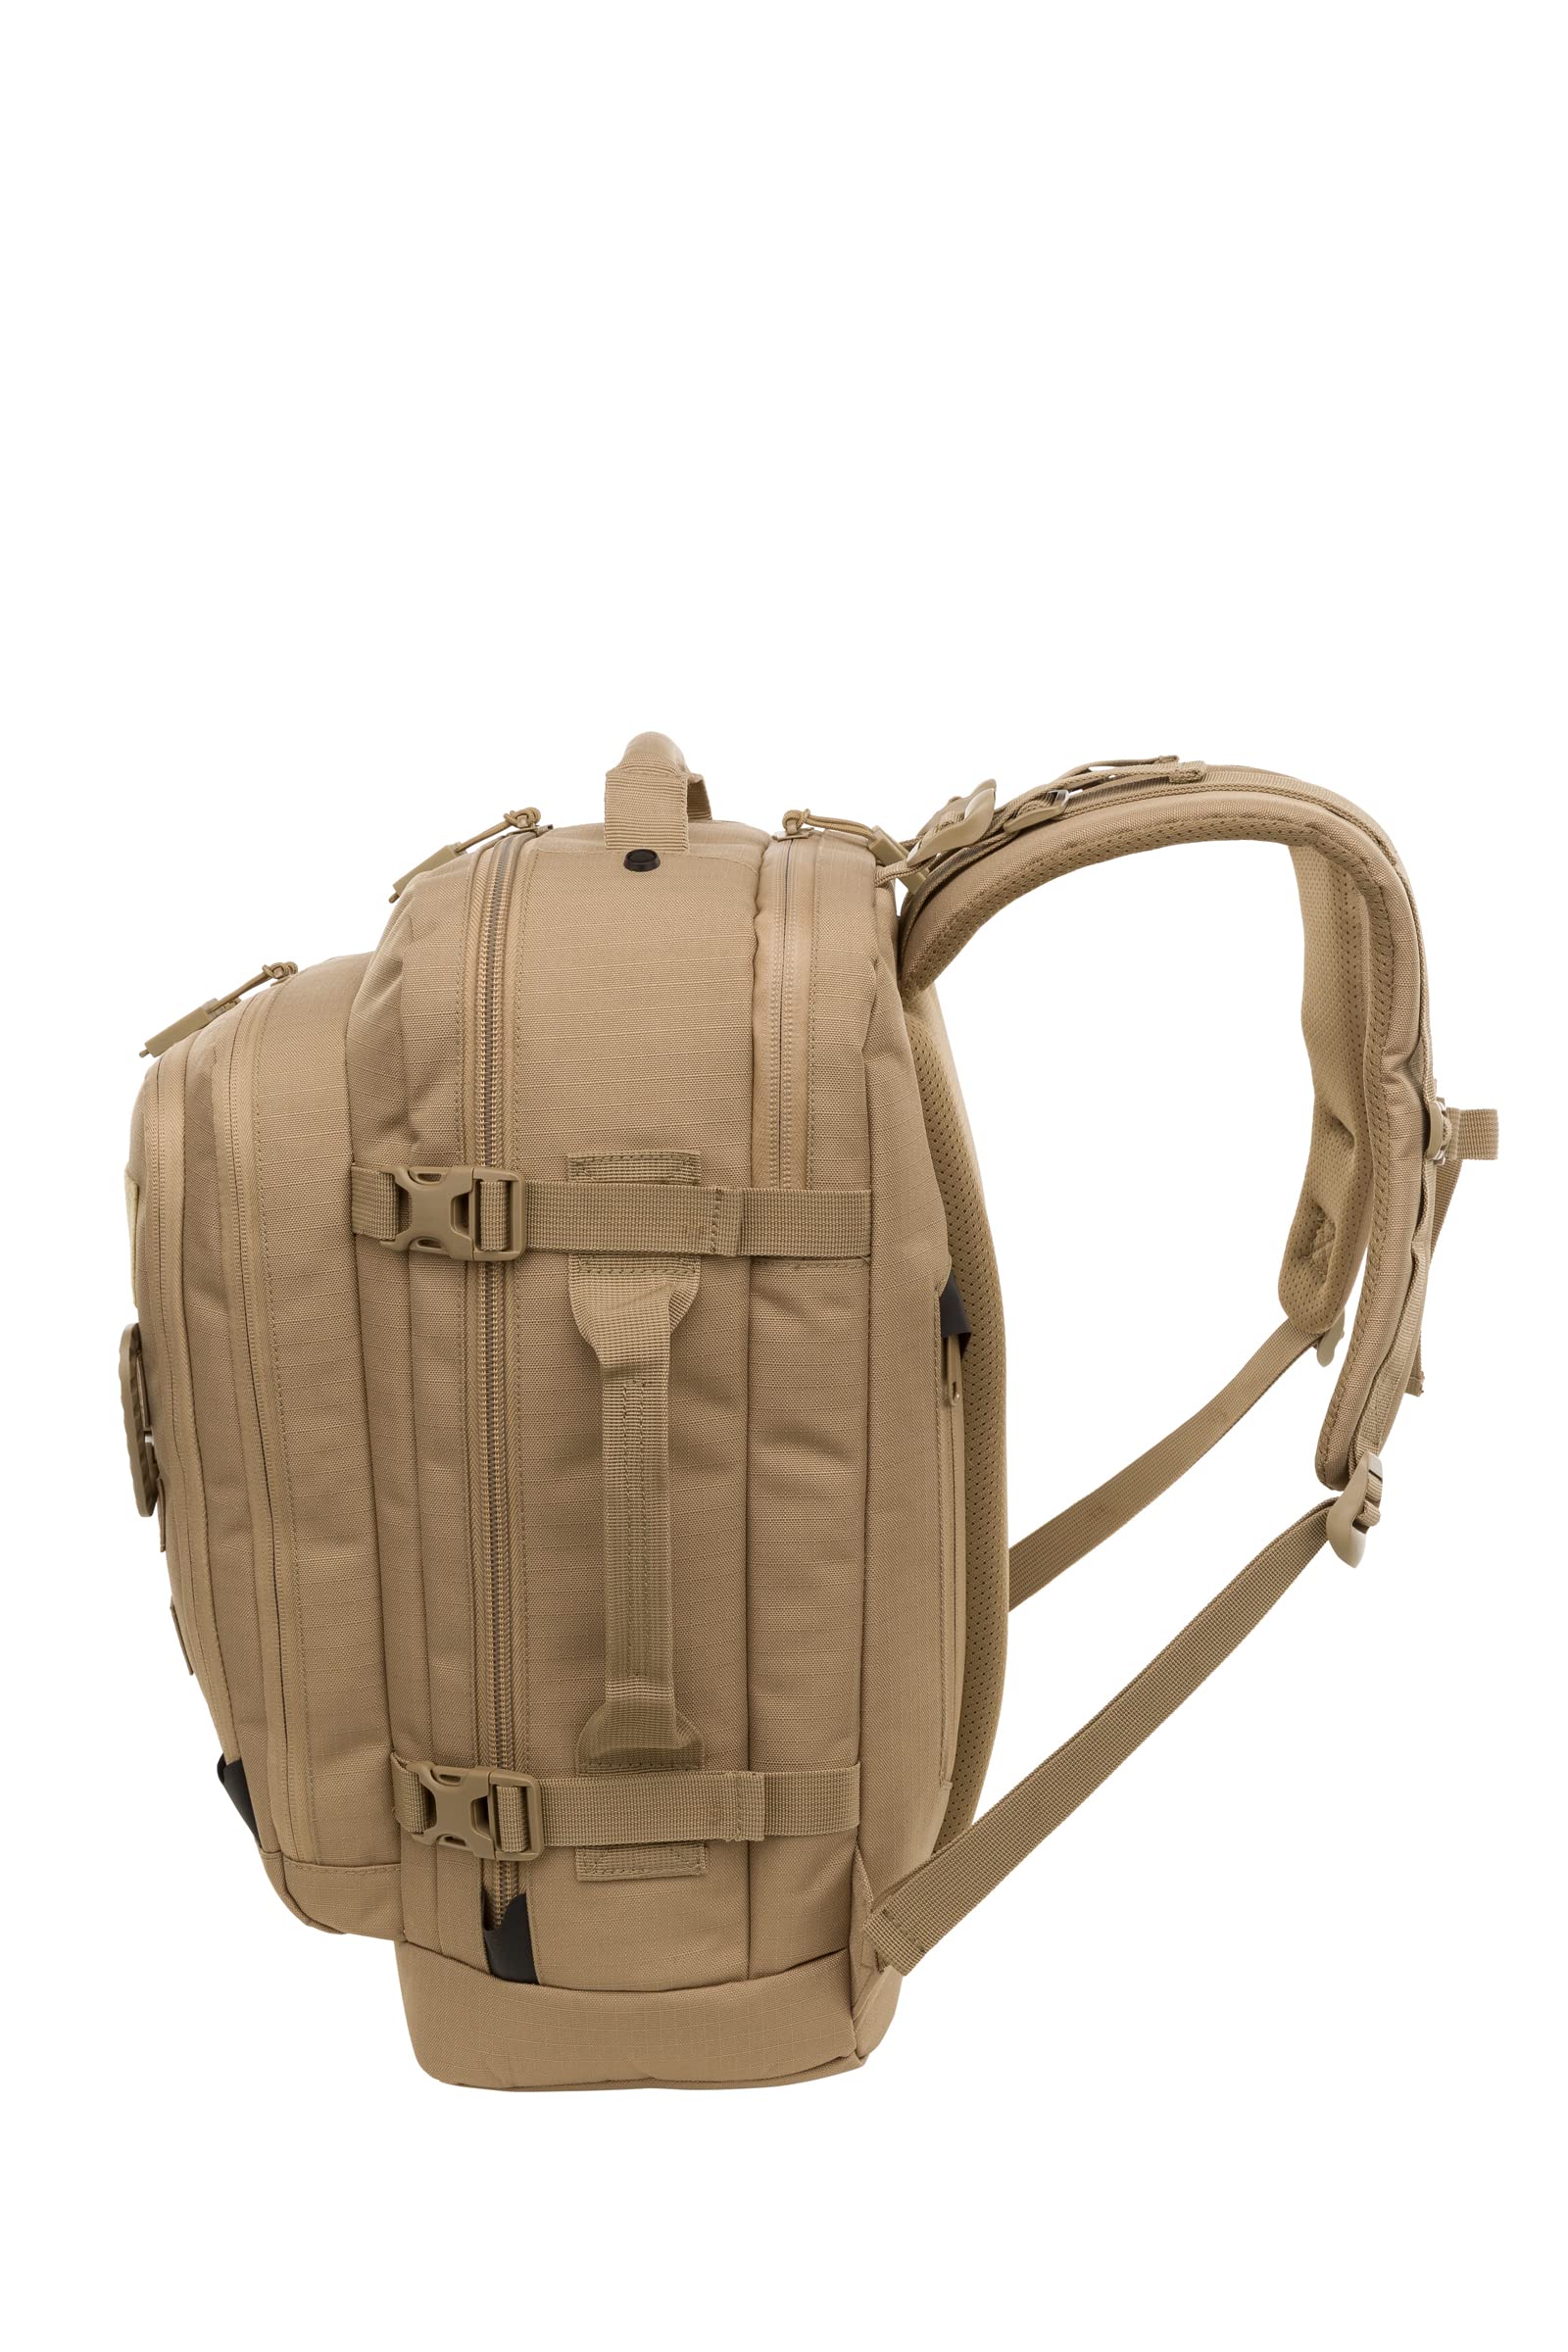 Fieldline Tactical Tactical Backpack, Coyote, 18.5 x 12.3 x 6.9 inches